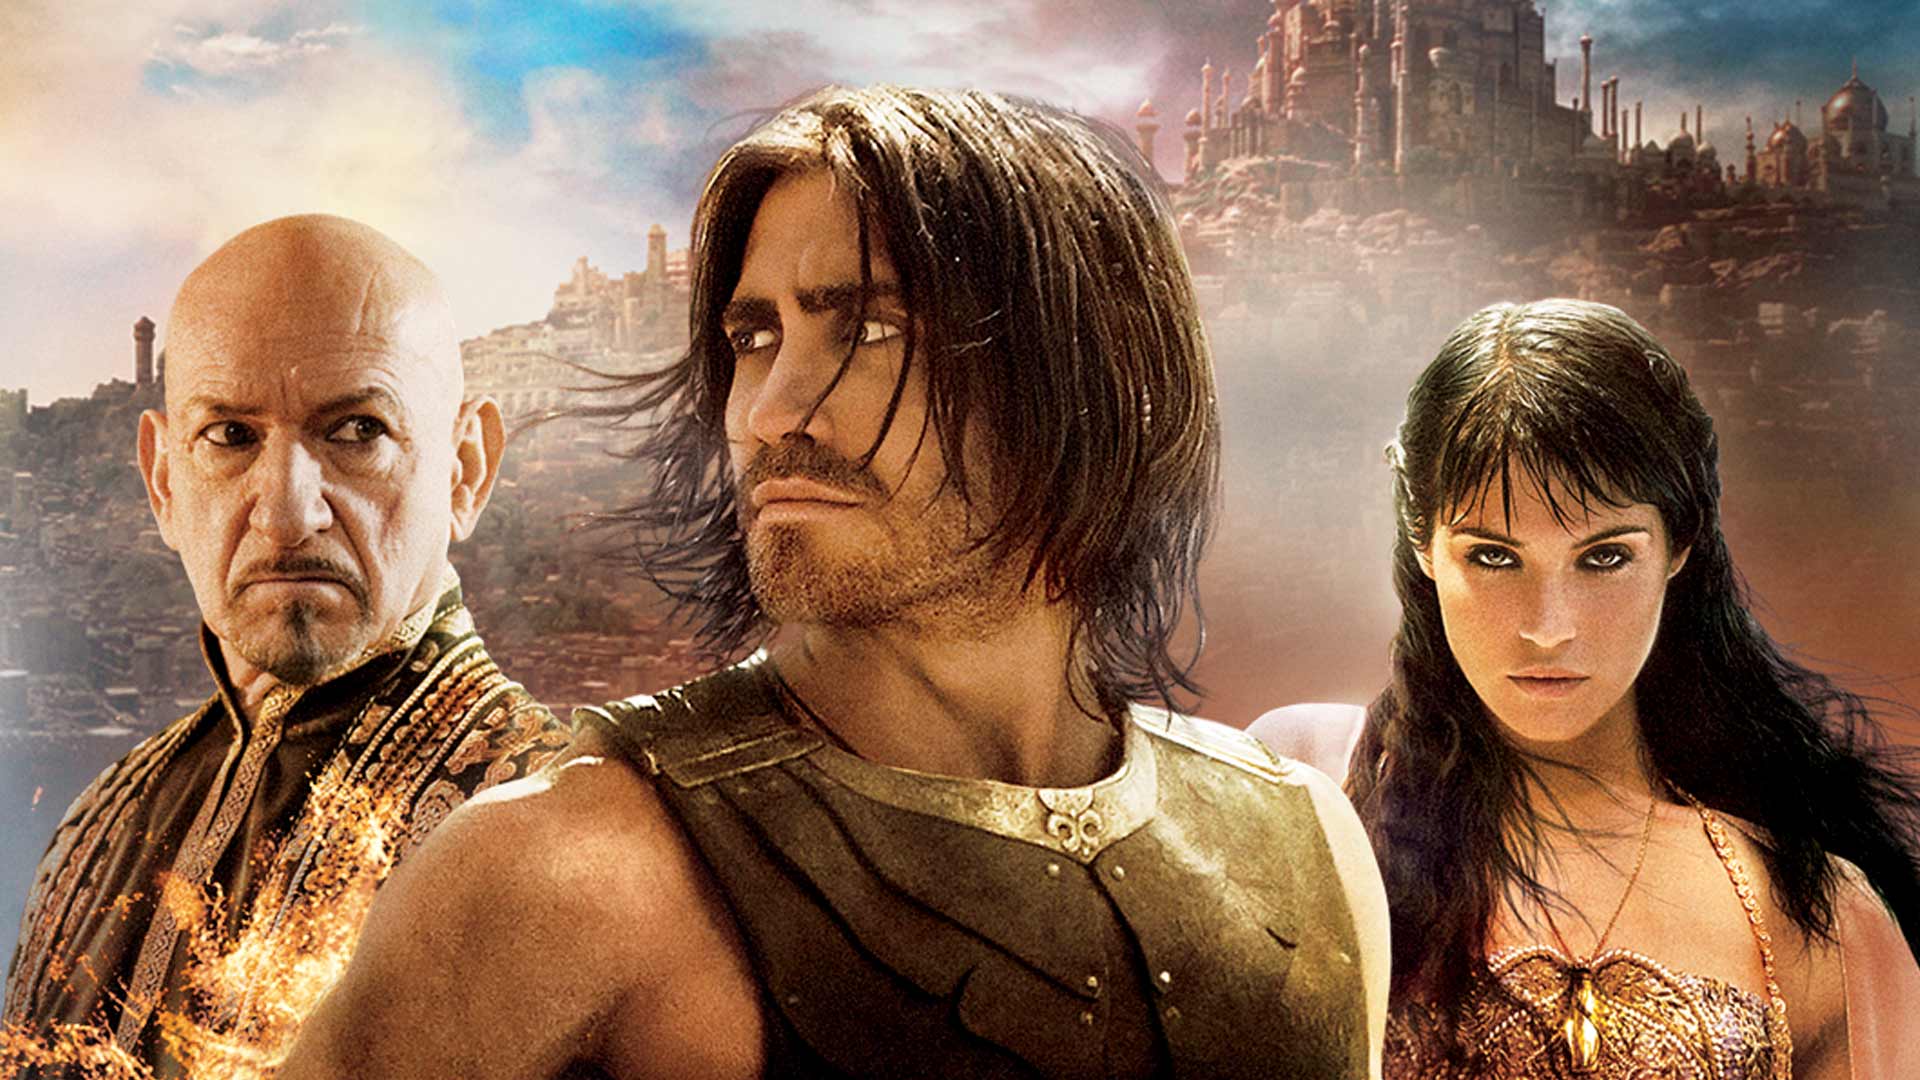 Watch Prince Of Persia: The Sands Of Time